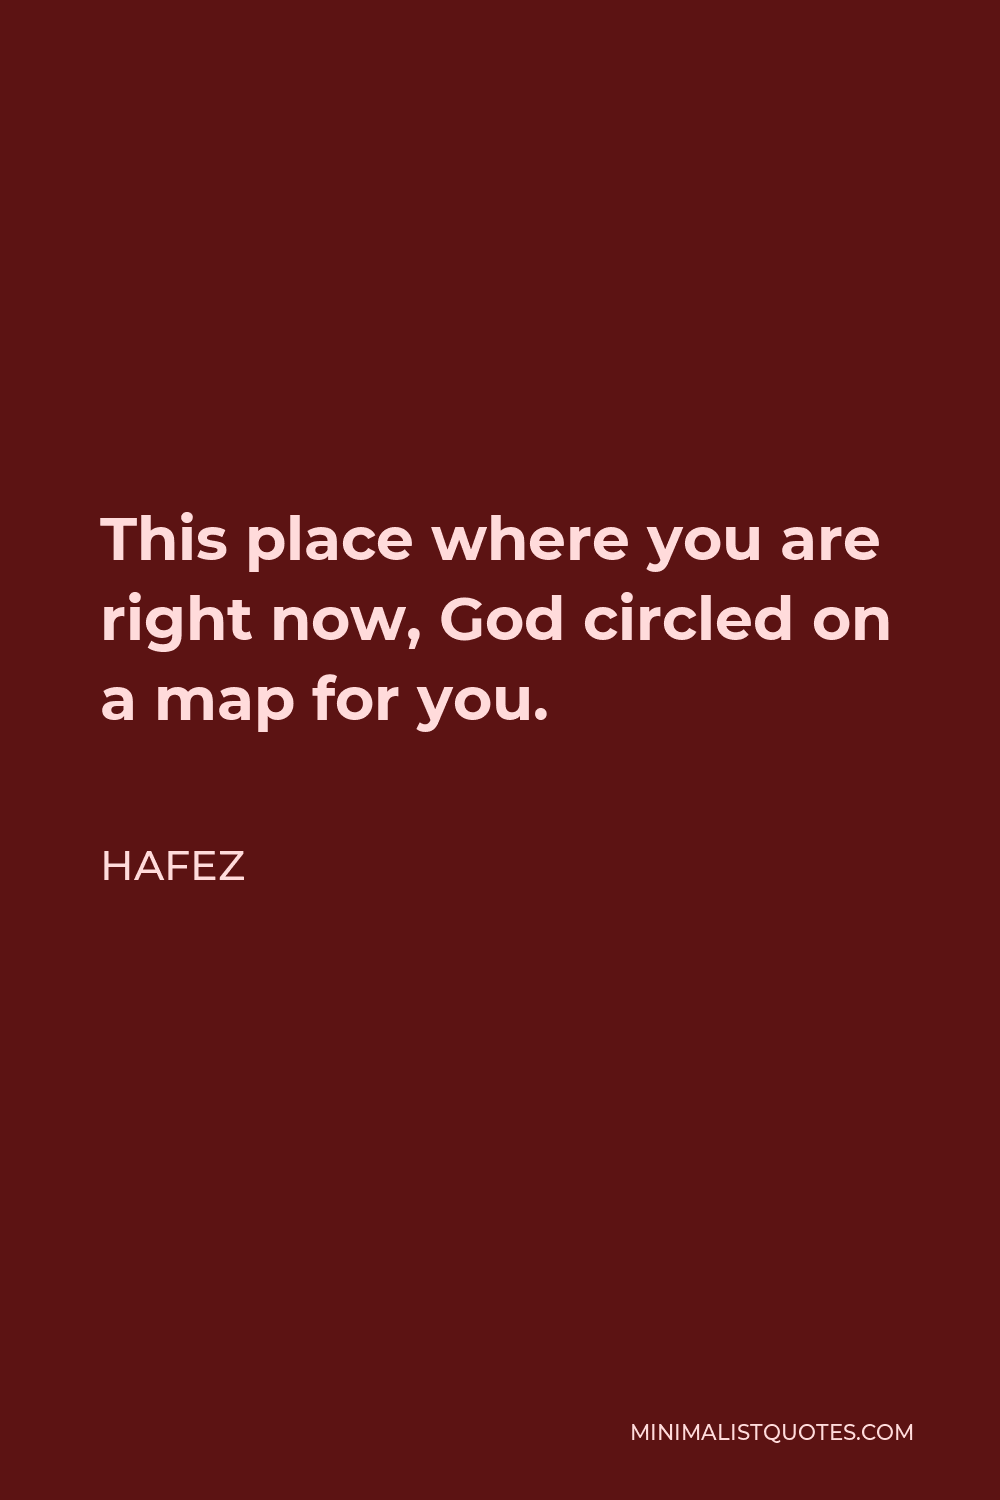 Hafez Quote - This place where you are right now, God circled on a map for you.